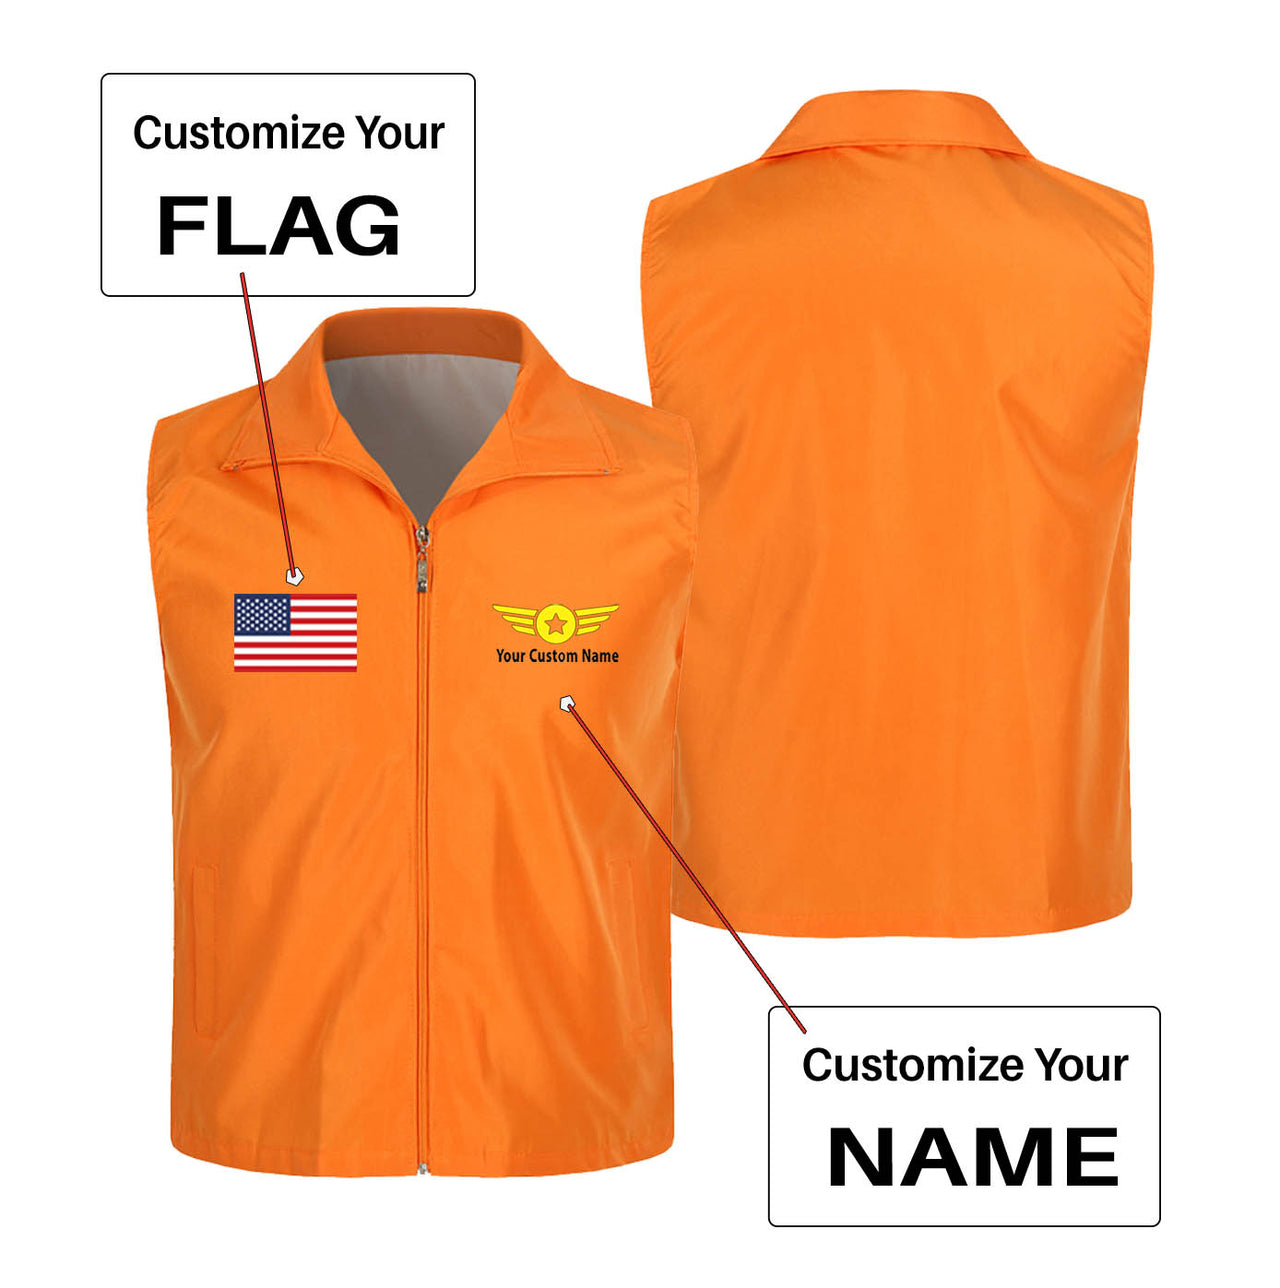 Custom Flag & Name with "Badge 4" Designed Thin Style Vests